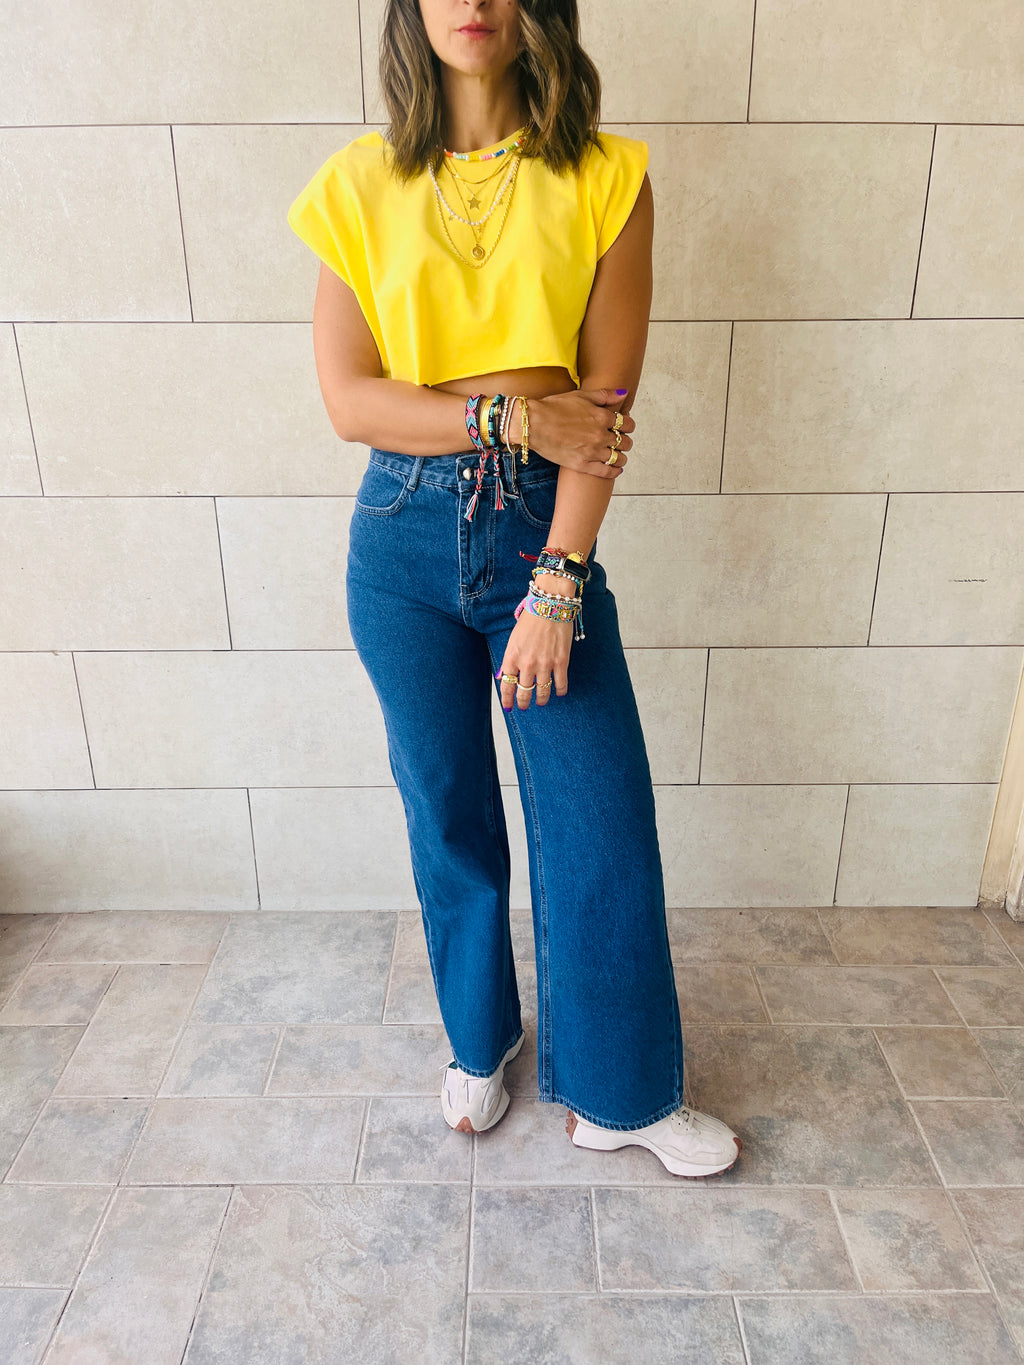 Yellow Boxy Shoulder Cropped Tee